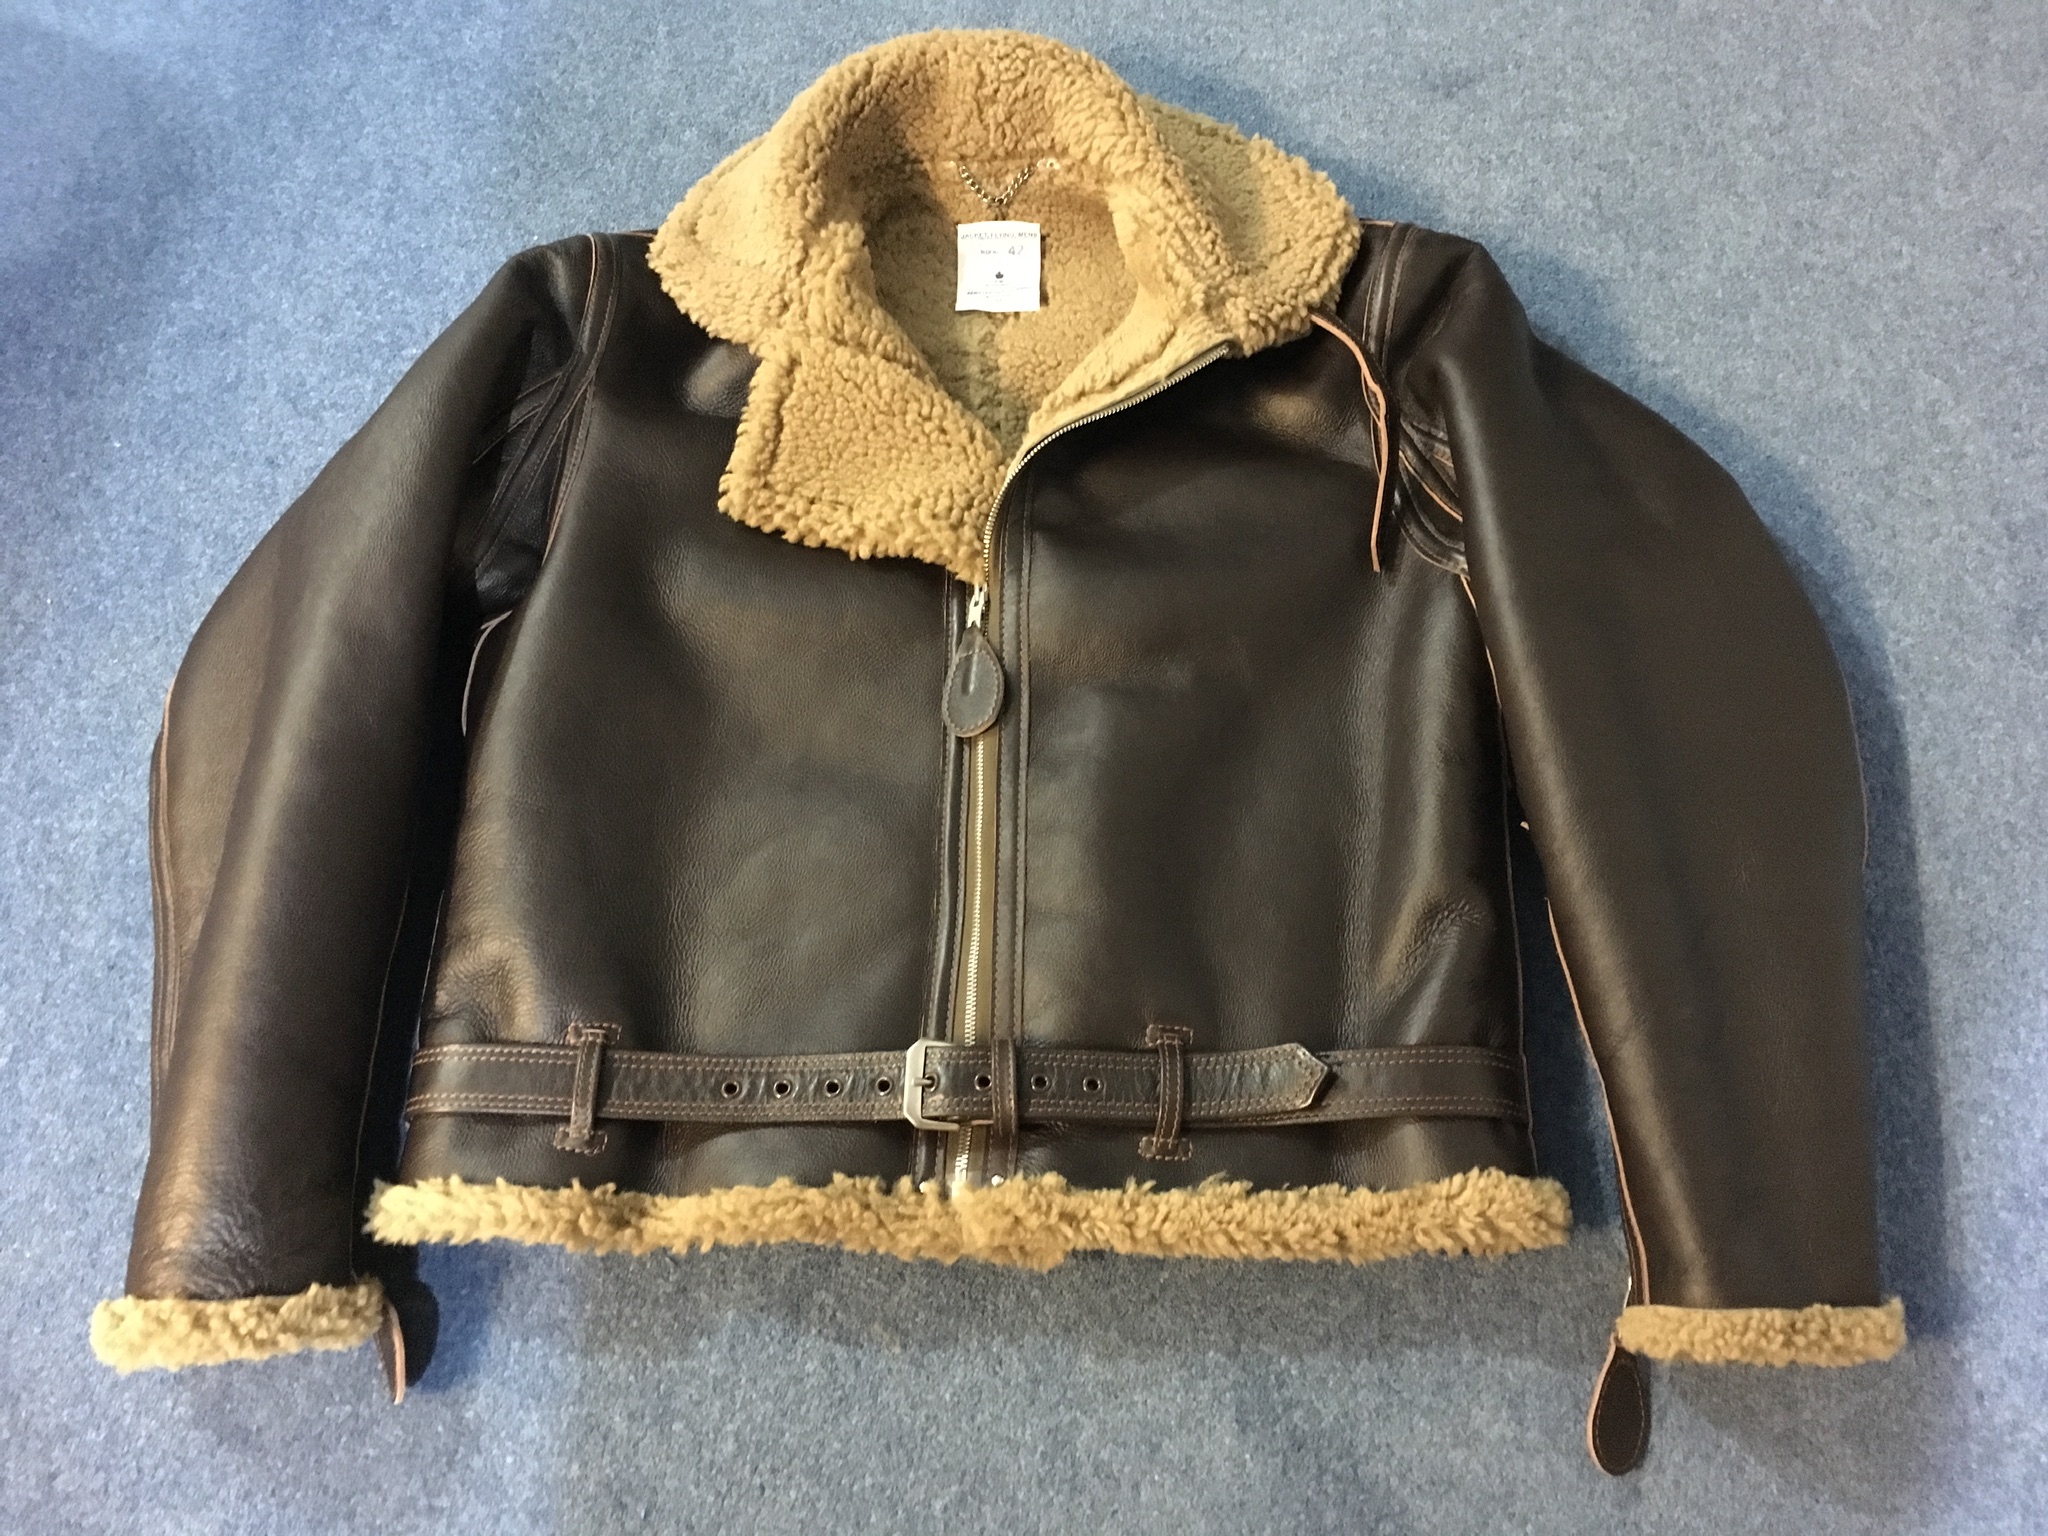 Irvin repros | Vintage Leather Jackets Forum